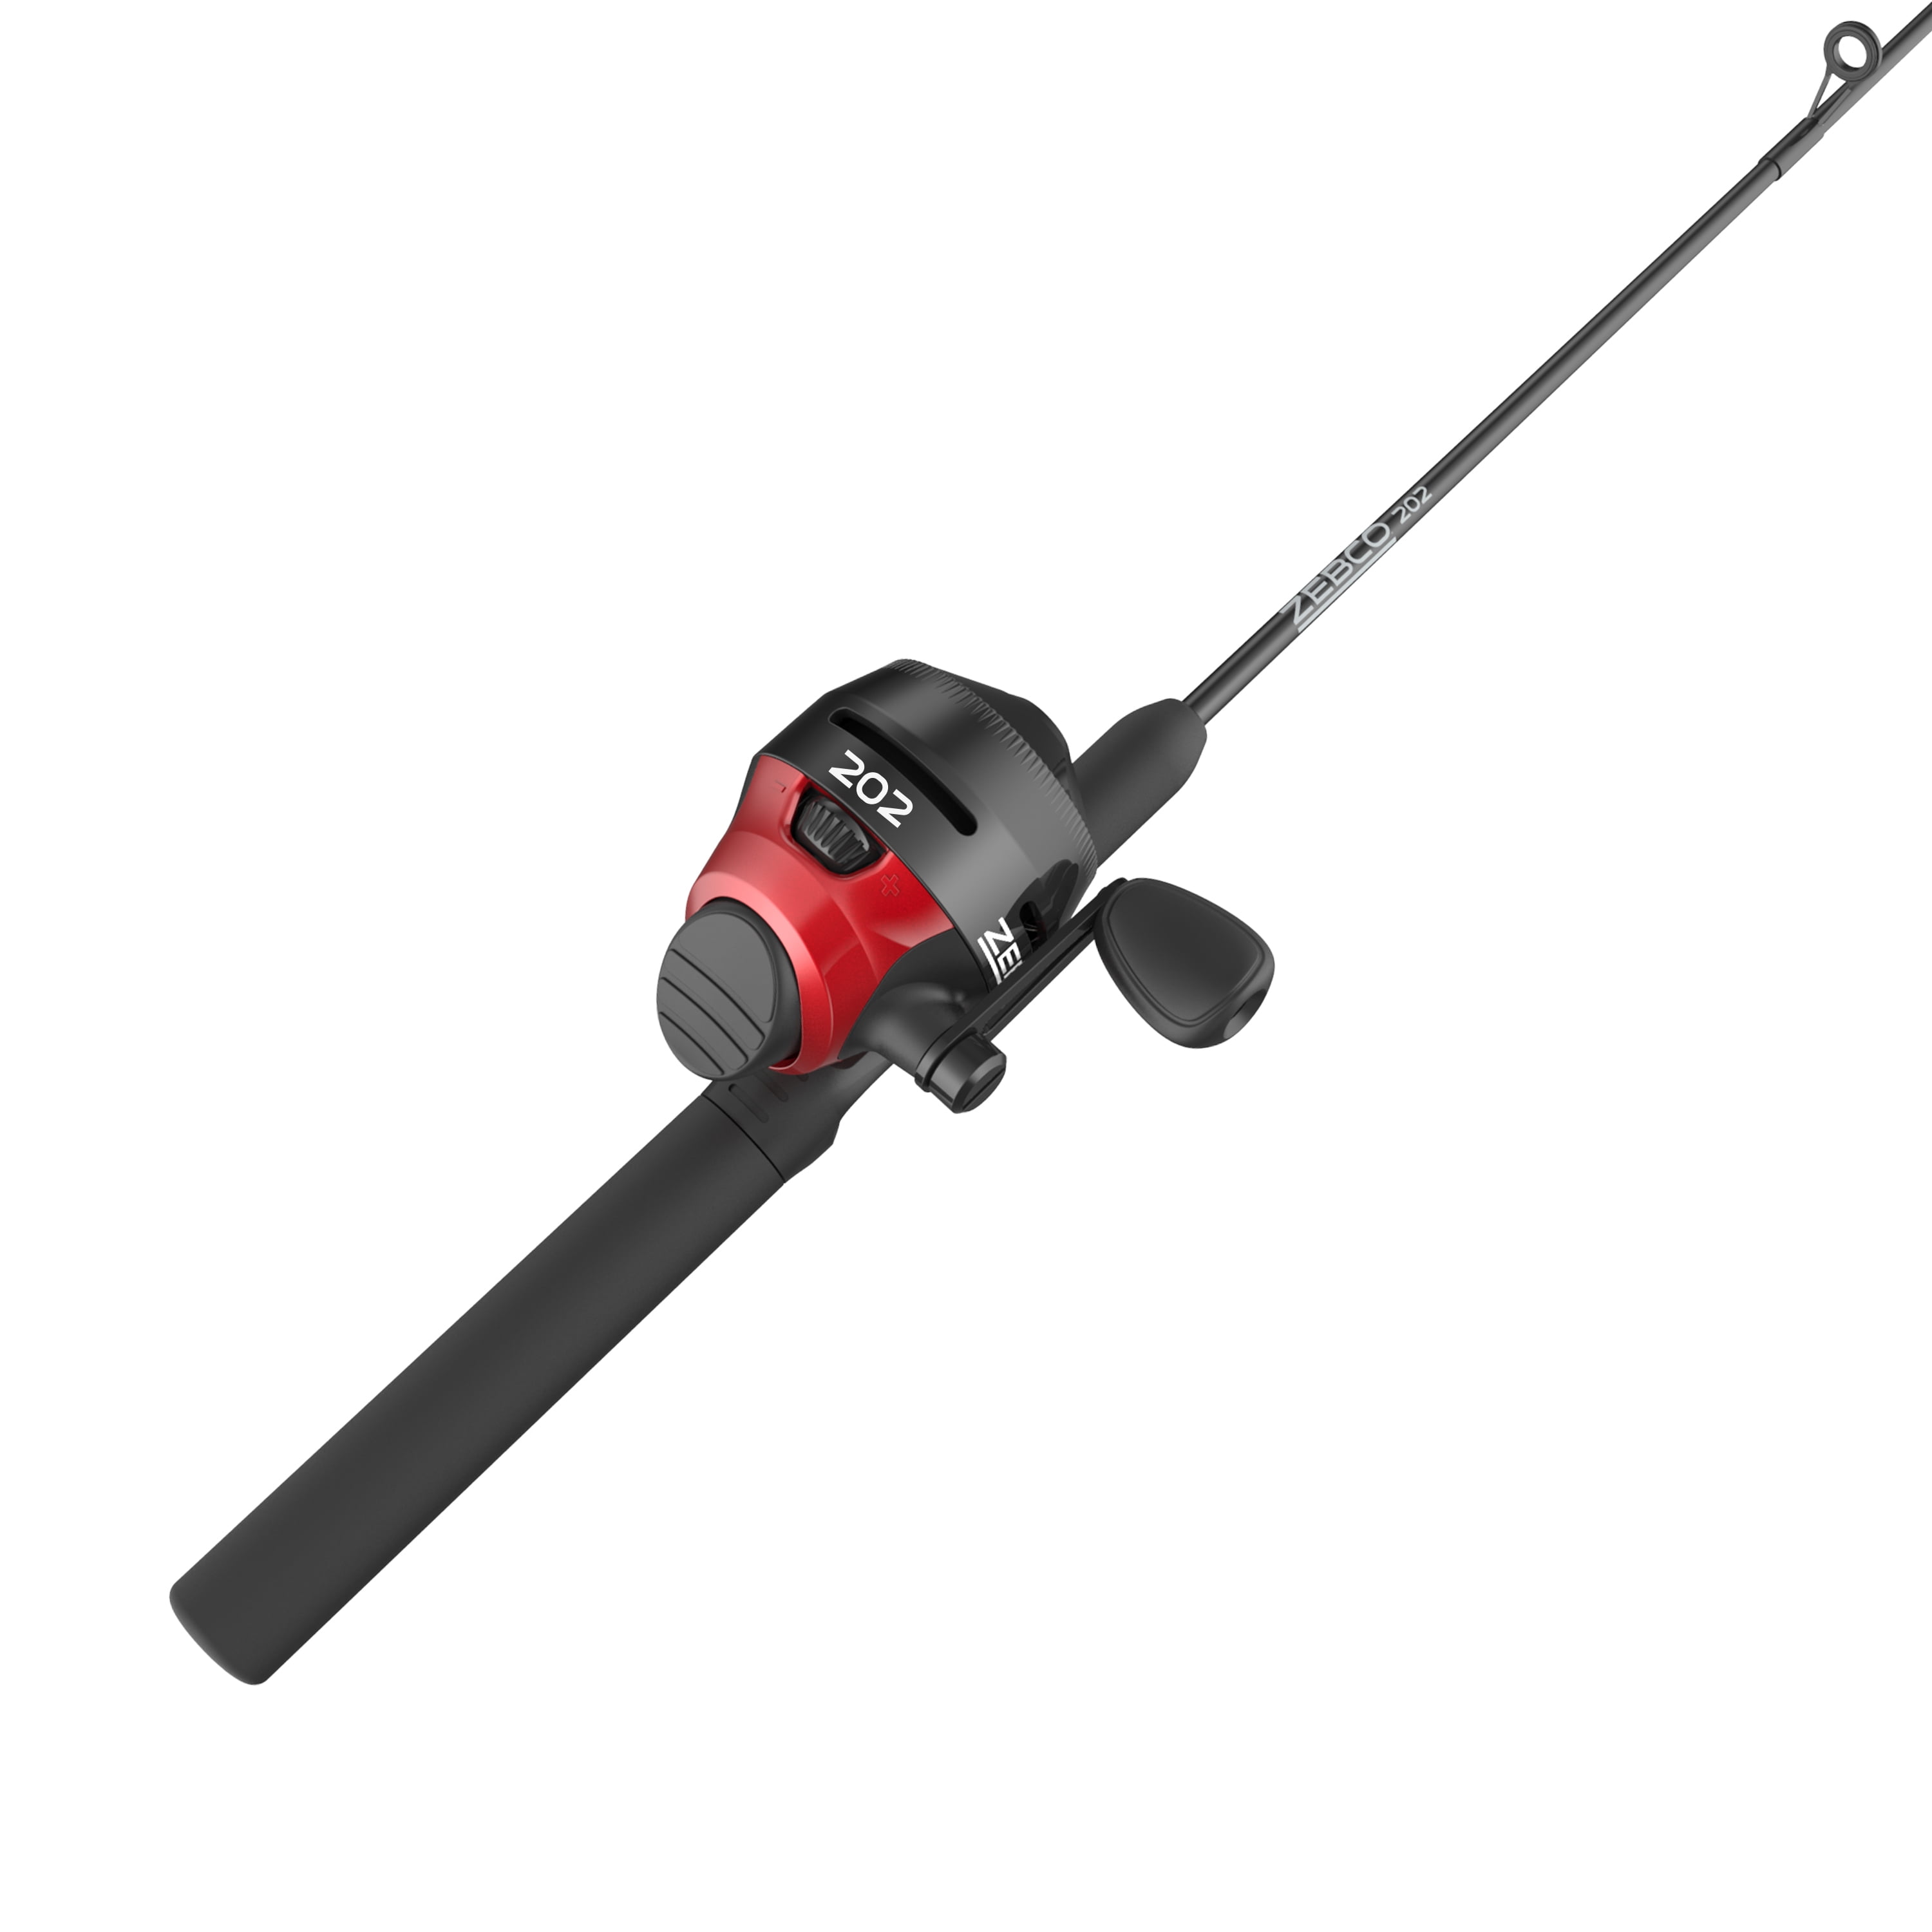 BRUNSWICK 202 ZEBCO CLOSED FACE SPIN CAST FISHING REEL 